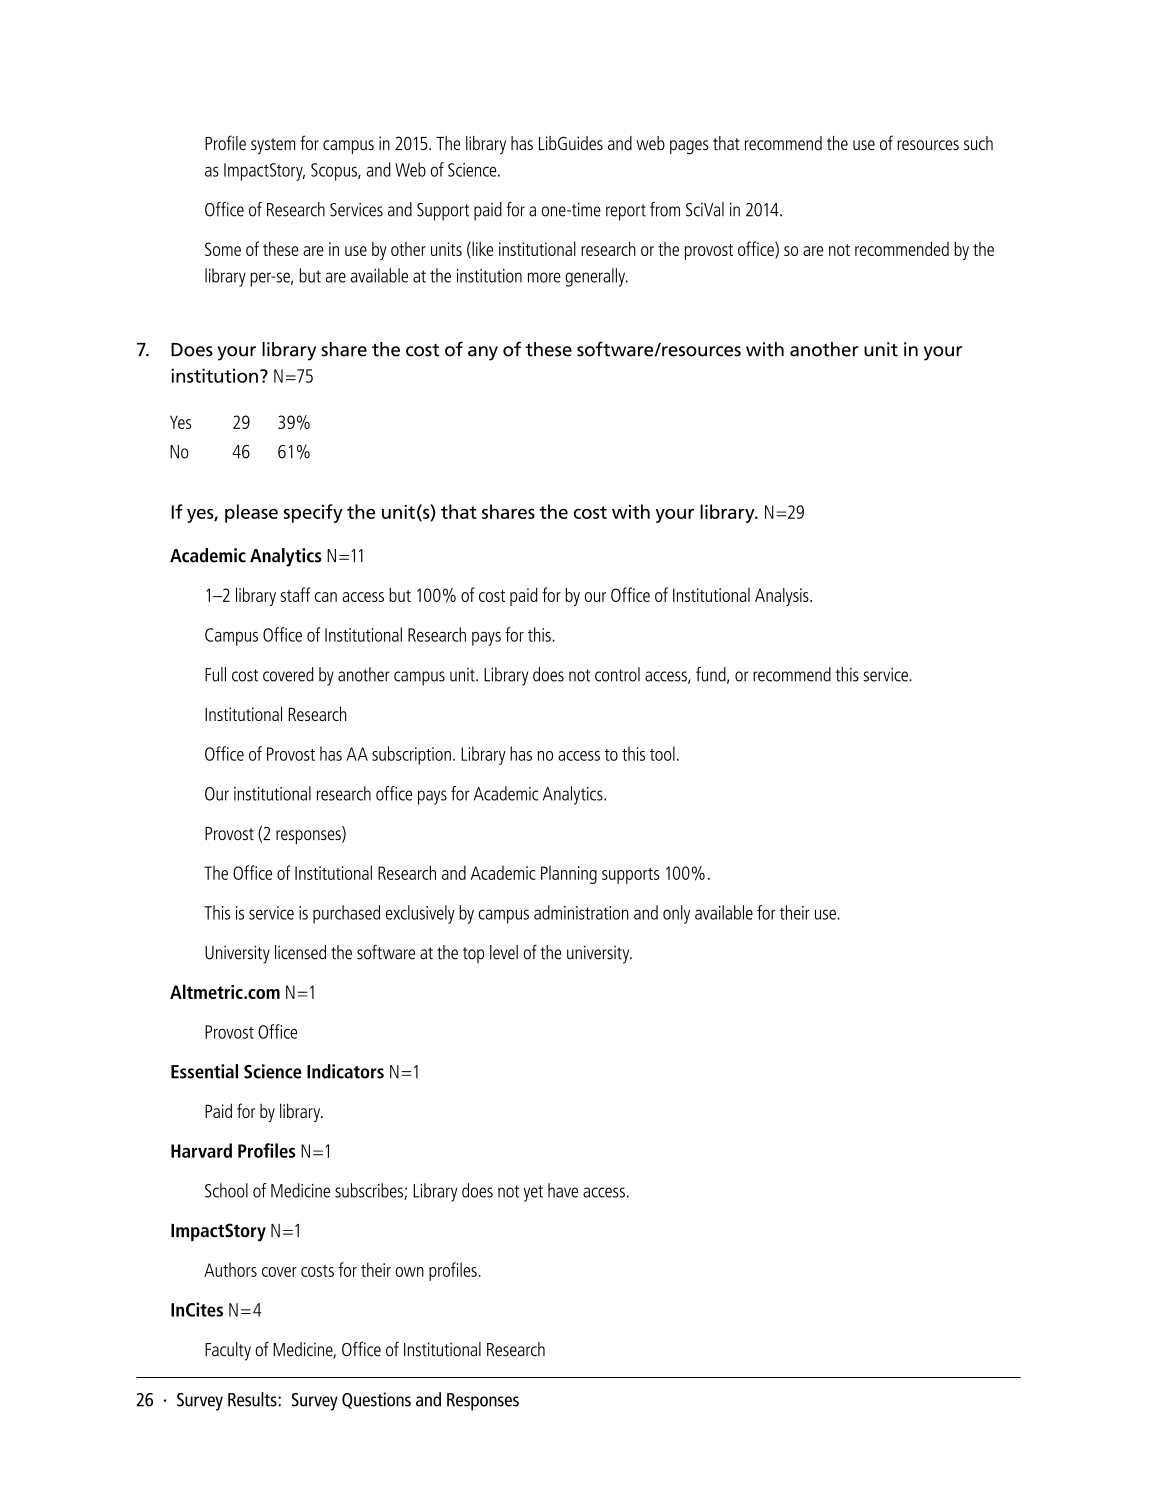 SPEC Kit 346: Scholarly Output Assessment Activities (May 2015) page 26